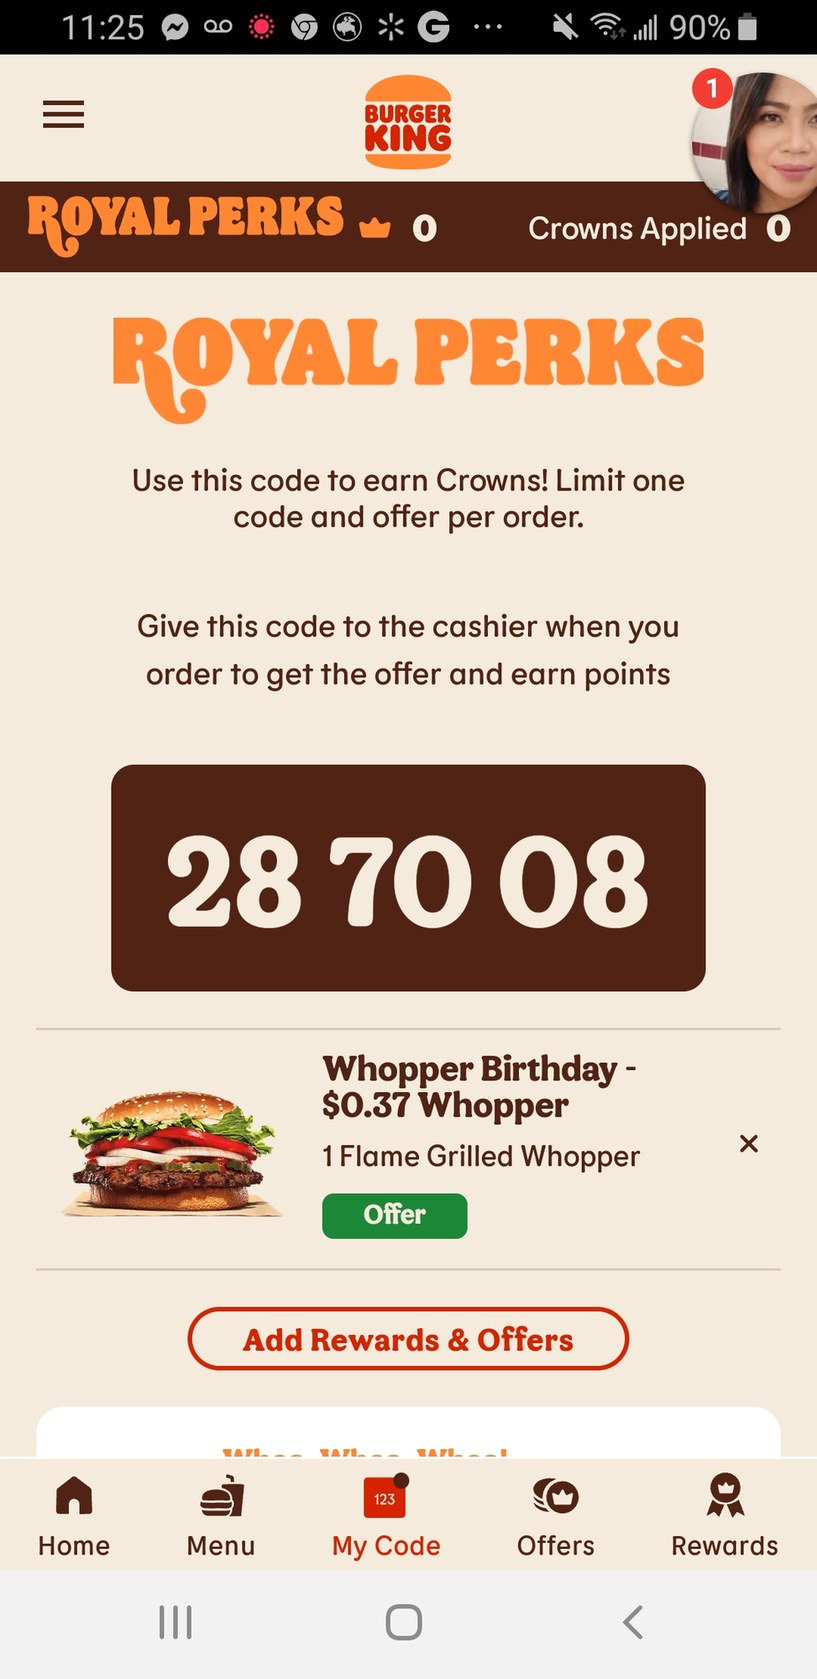 Quick you have 8 seconds to redeem this code - meme